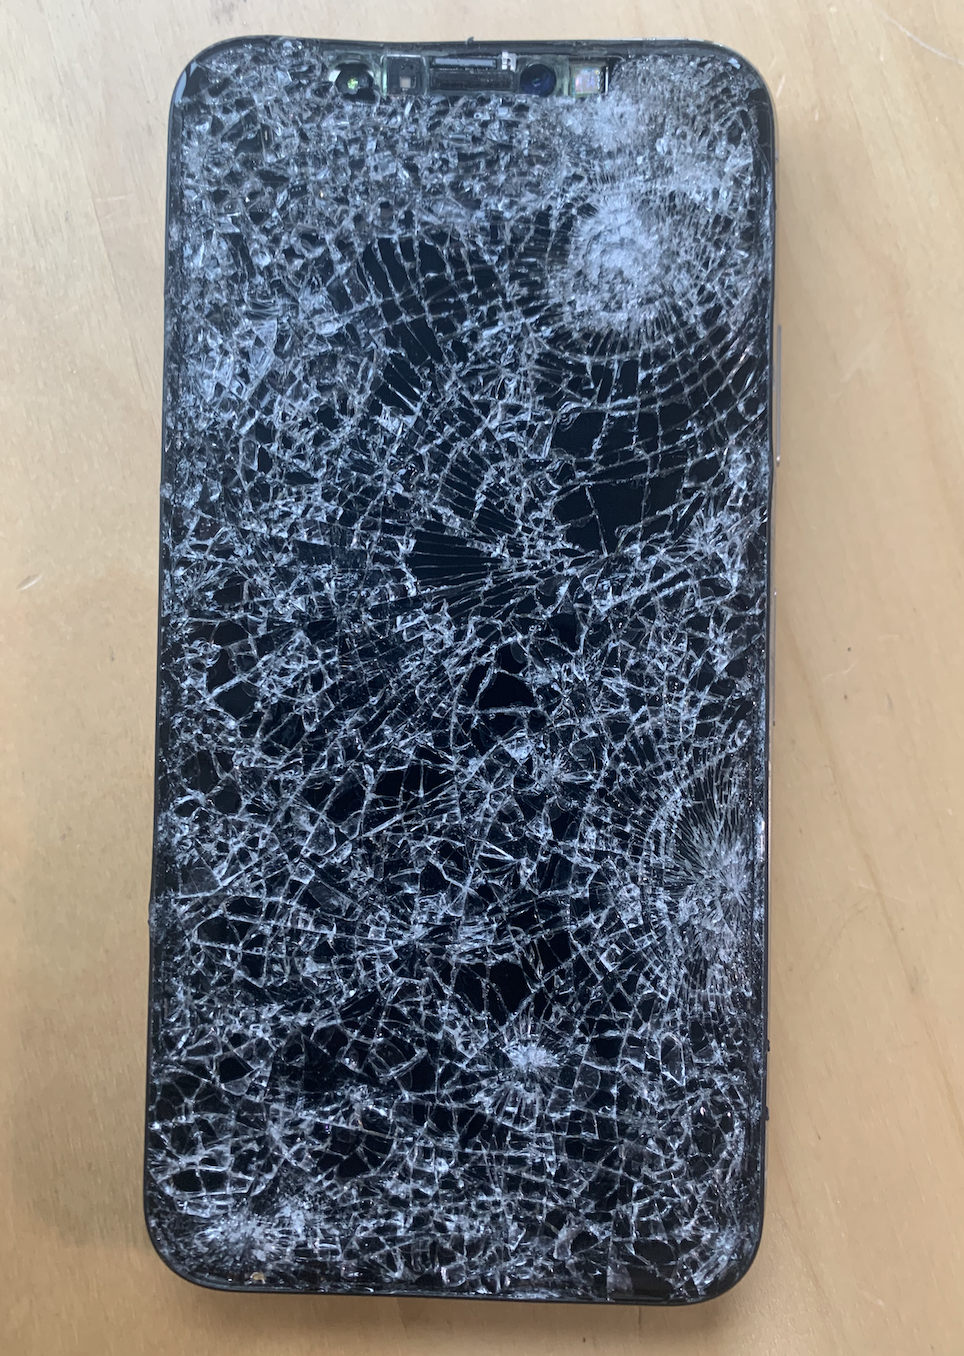 Read more about the article My Cell Phone Screen Broke Again – is a Cracked Phone Screen inevitable?